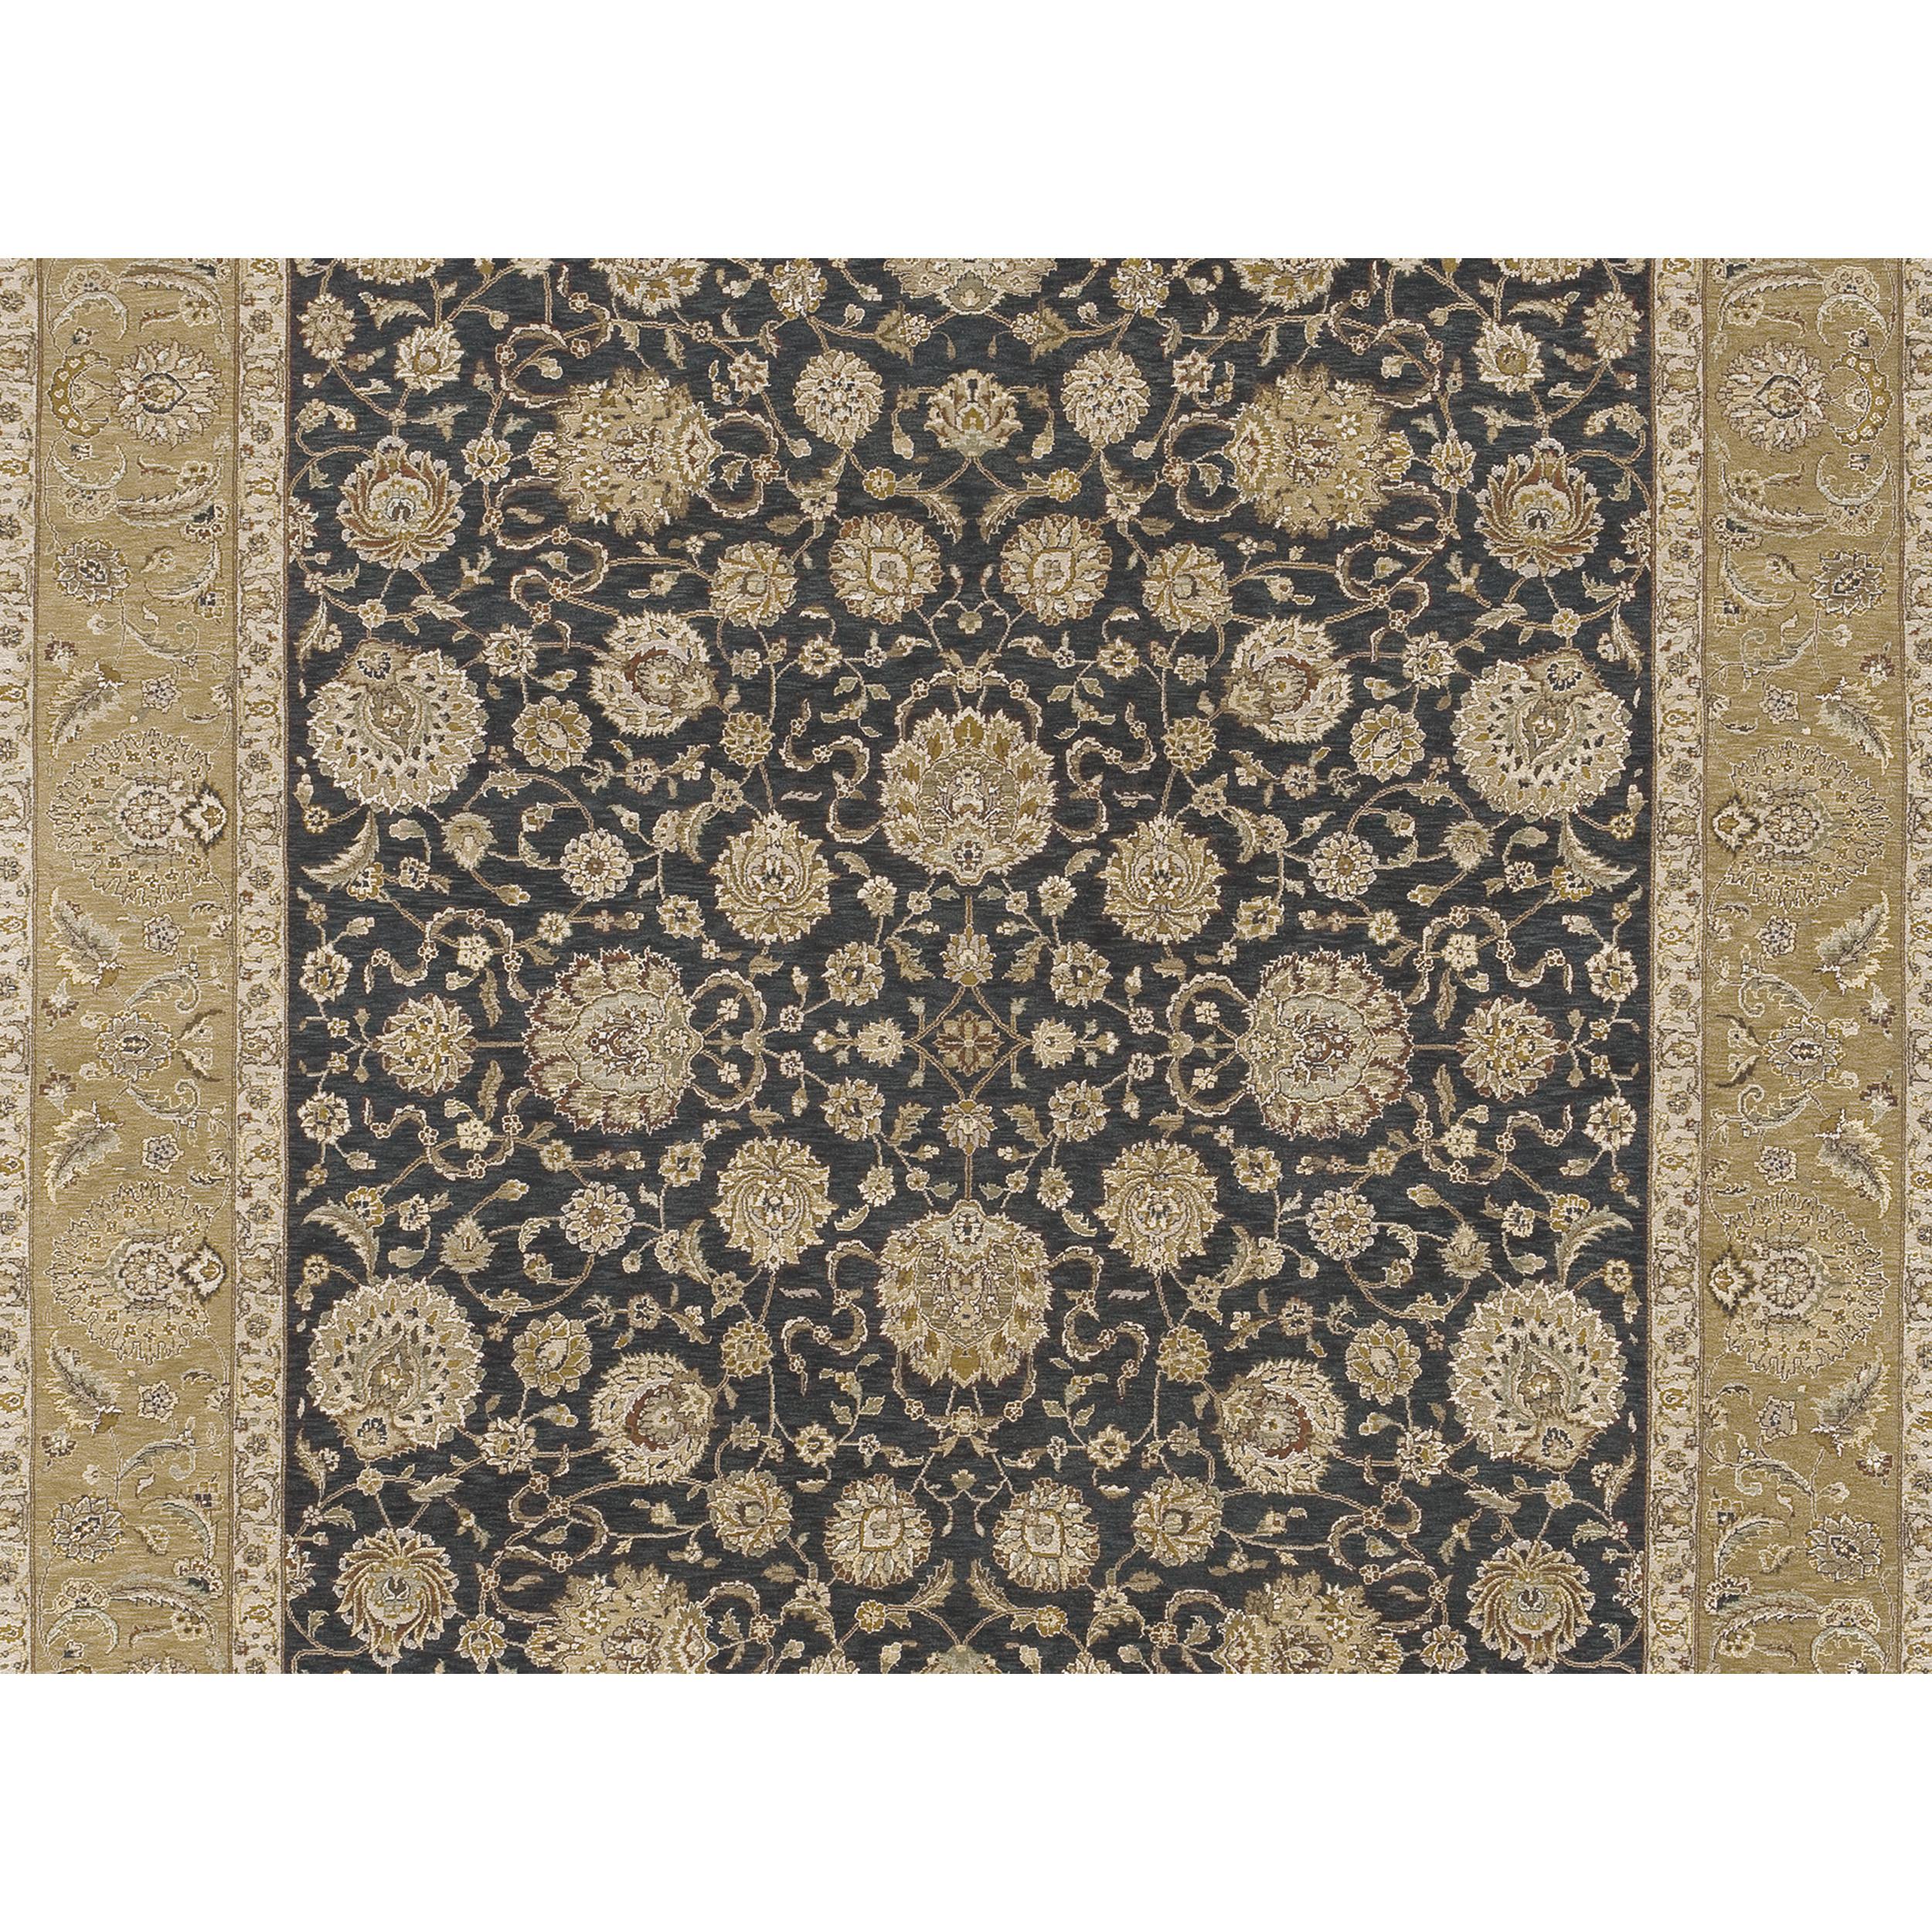 Luxury Traditional Hand-Knotted Kashan Black  & Gold 12x18 Rug In New Condition For Sale In Secaucus, NJ